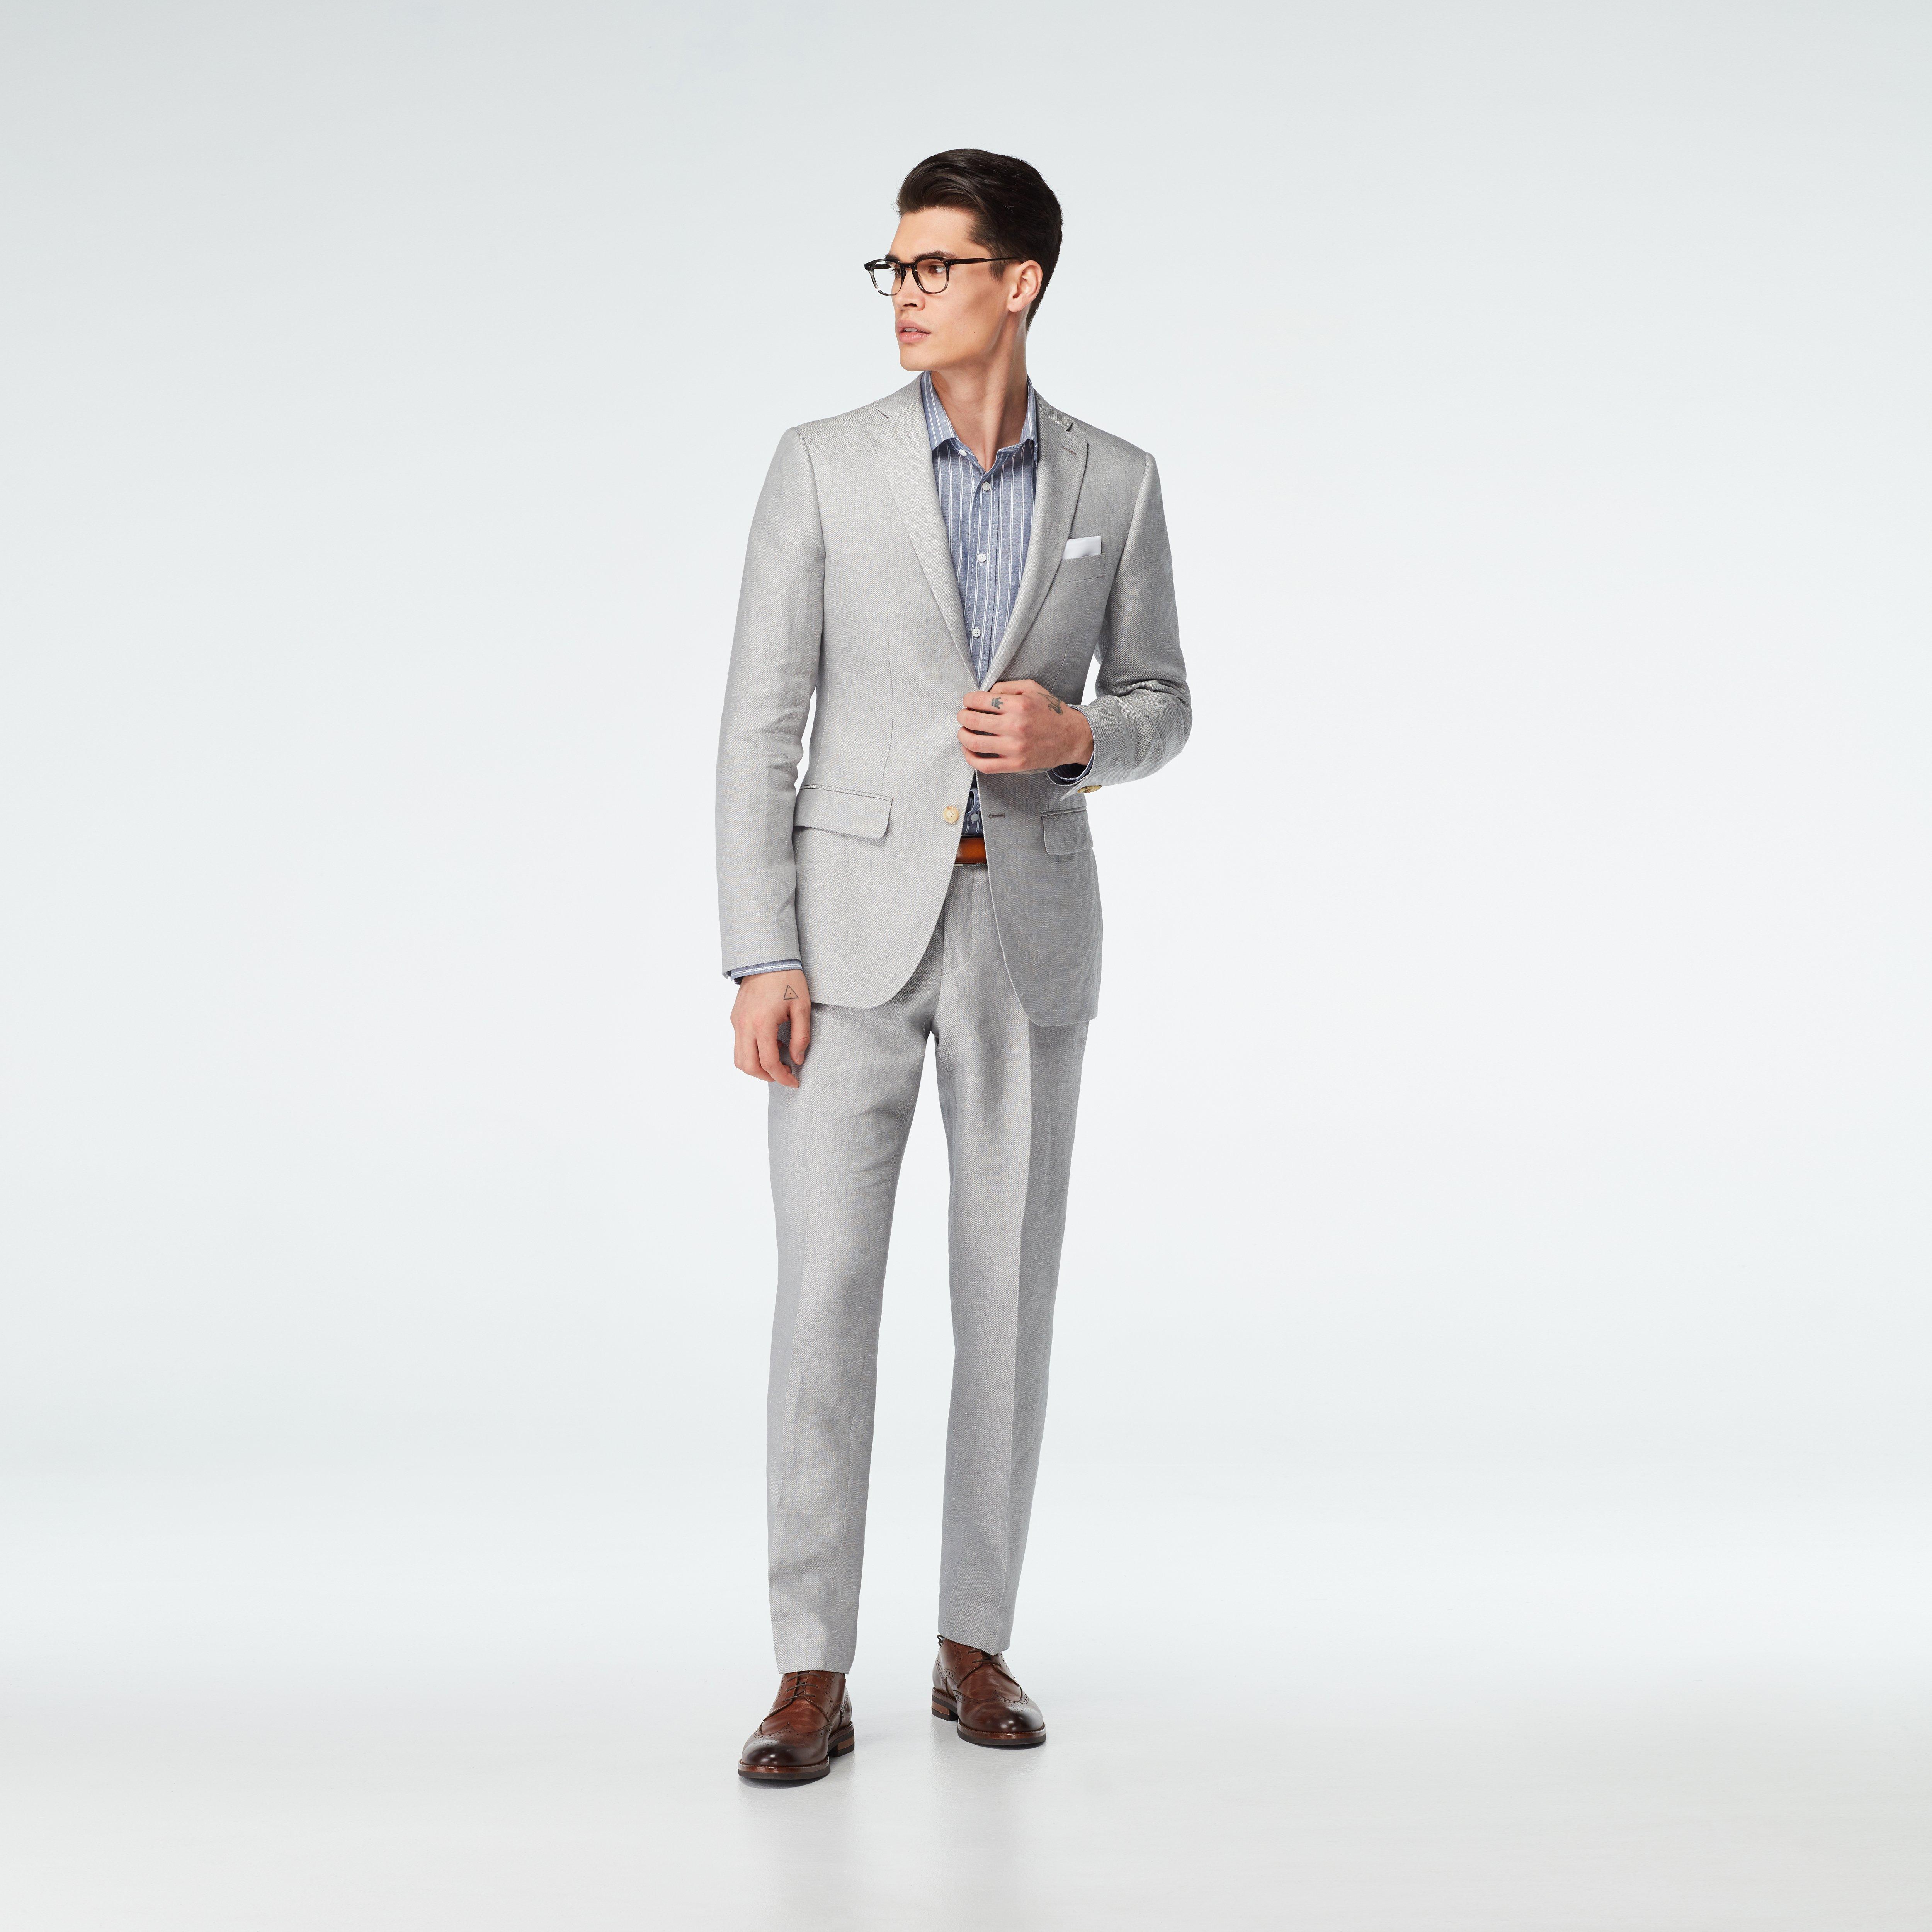 Custom Suits Made For You - Sailsbury Linen Gray Suit | INDOCHINO